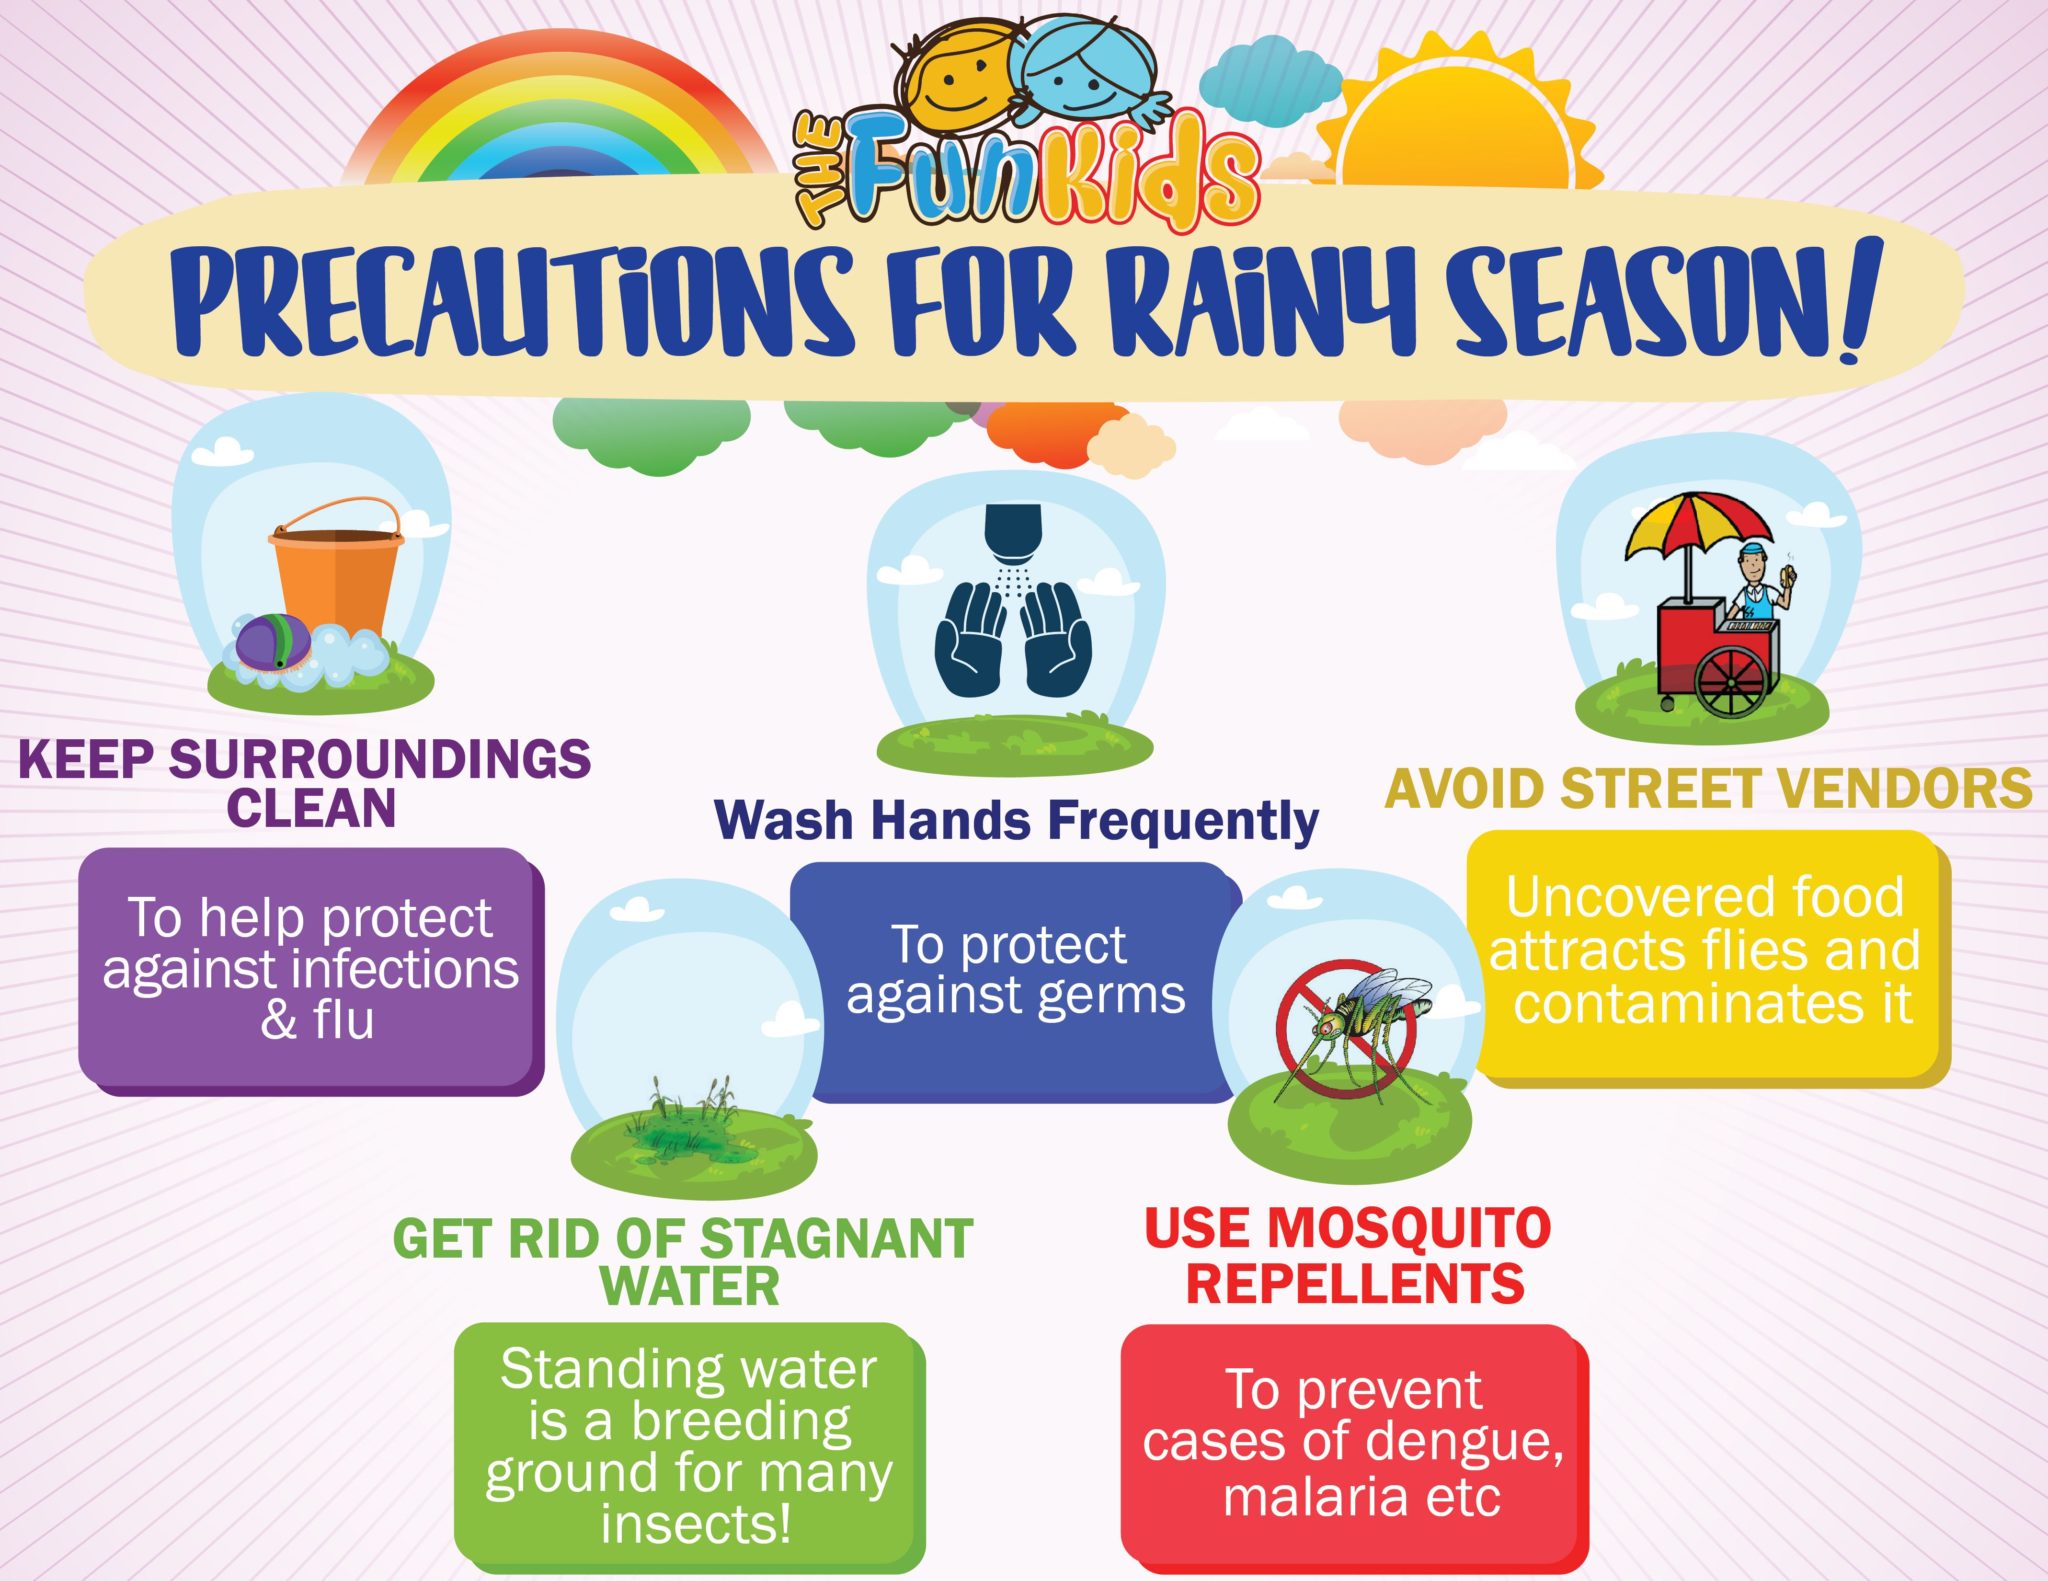 How To Prevent Cold In Rainy Season